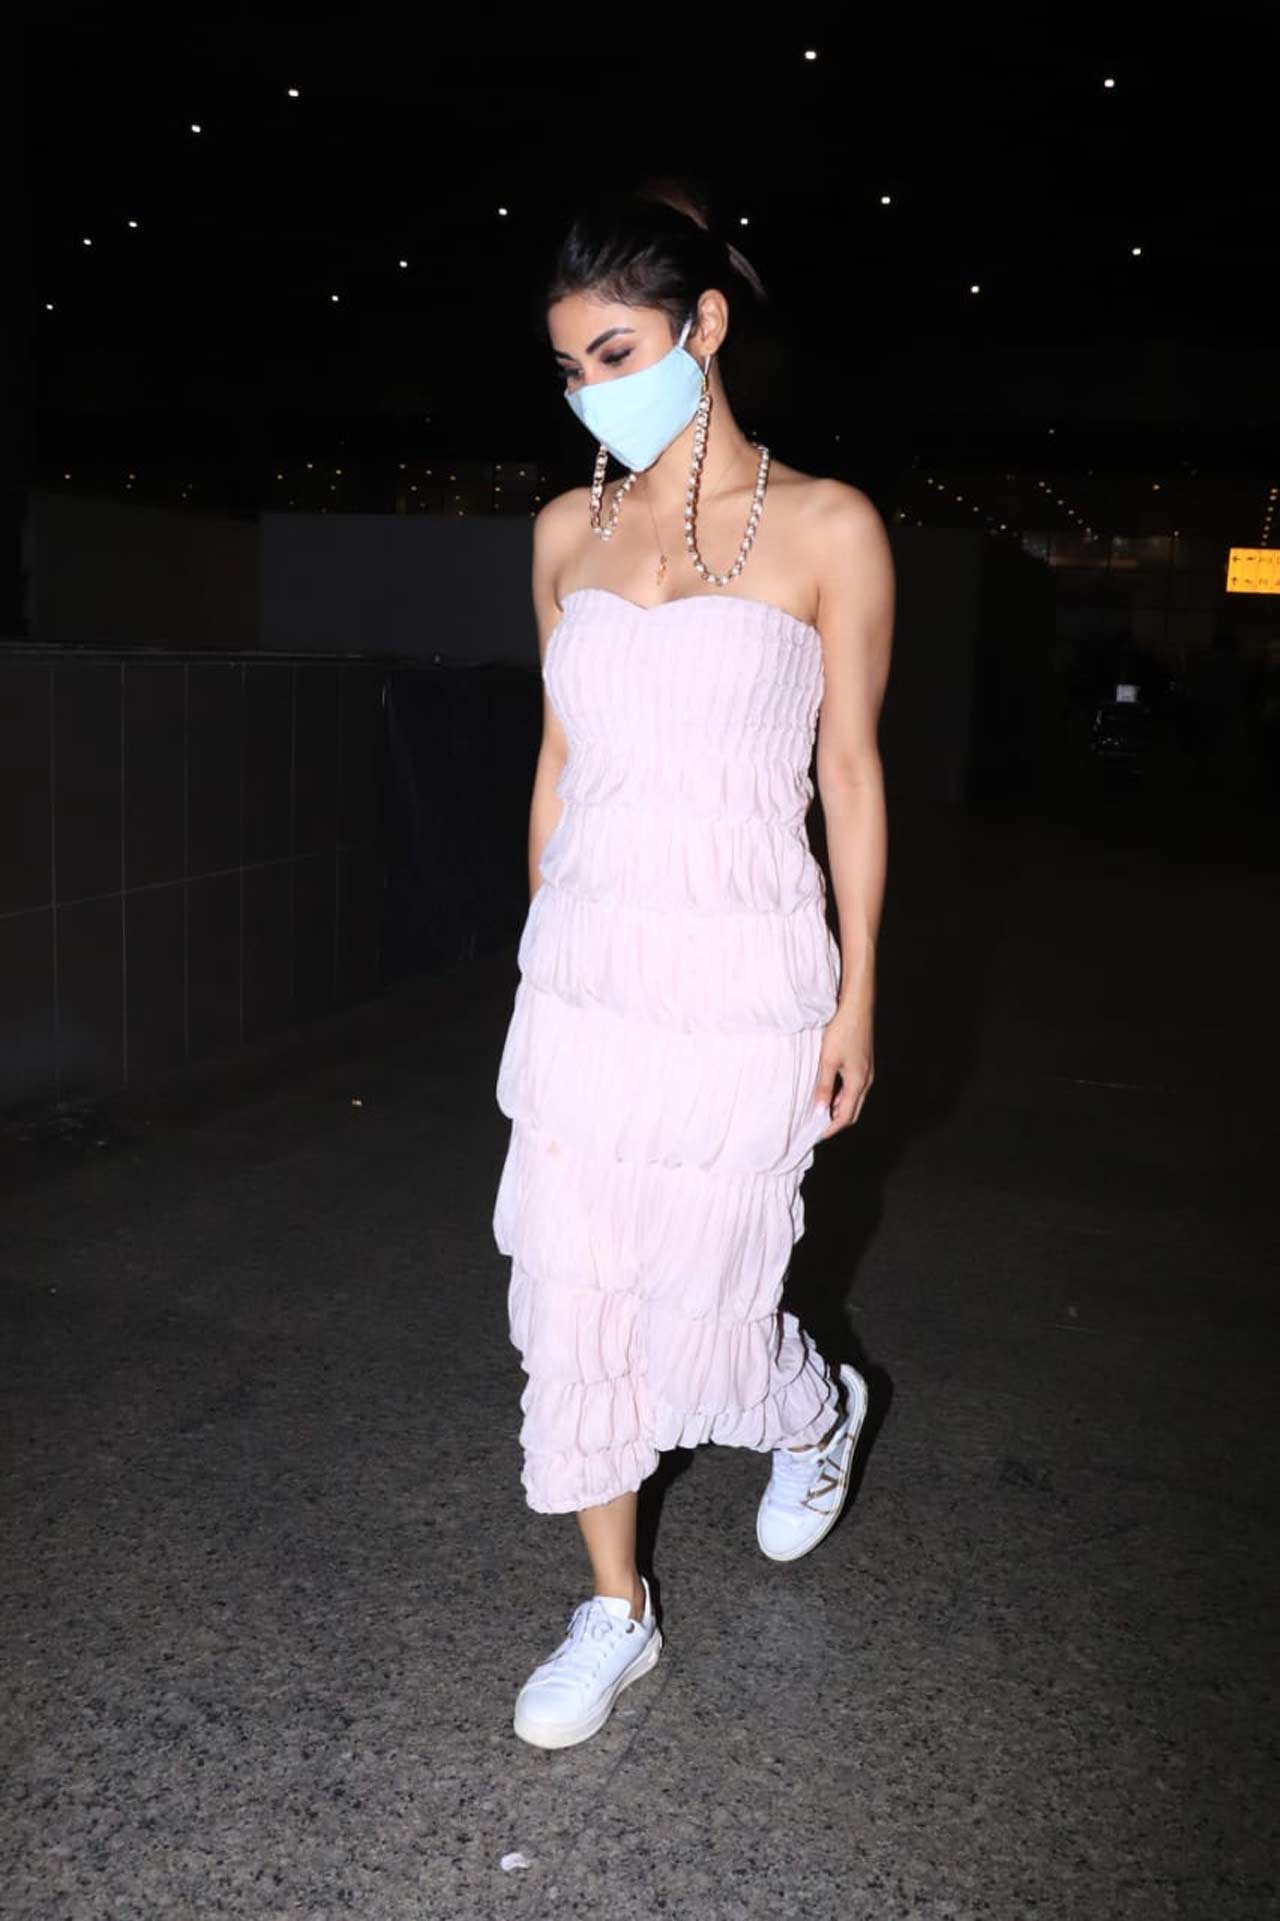 Mouni Roy stunned in a ruffled dress as she opted for a pretty strap outfit for her airport look! The actress, who made her digital debut with London Confidential, is all set to play a pivotal role in Ayan Mukerji's fantasy drama, Brahmastra, starring Ranbir Kapoor and Alia Bhatt. All pictures/Yogen Shah